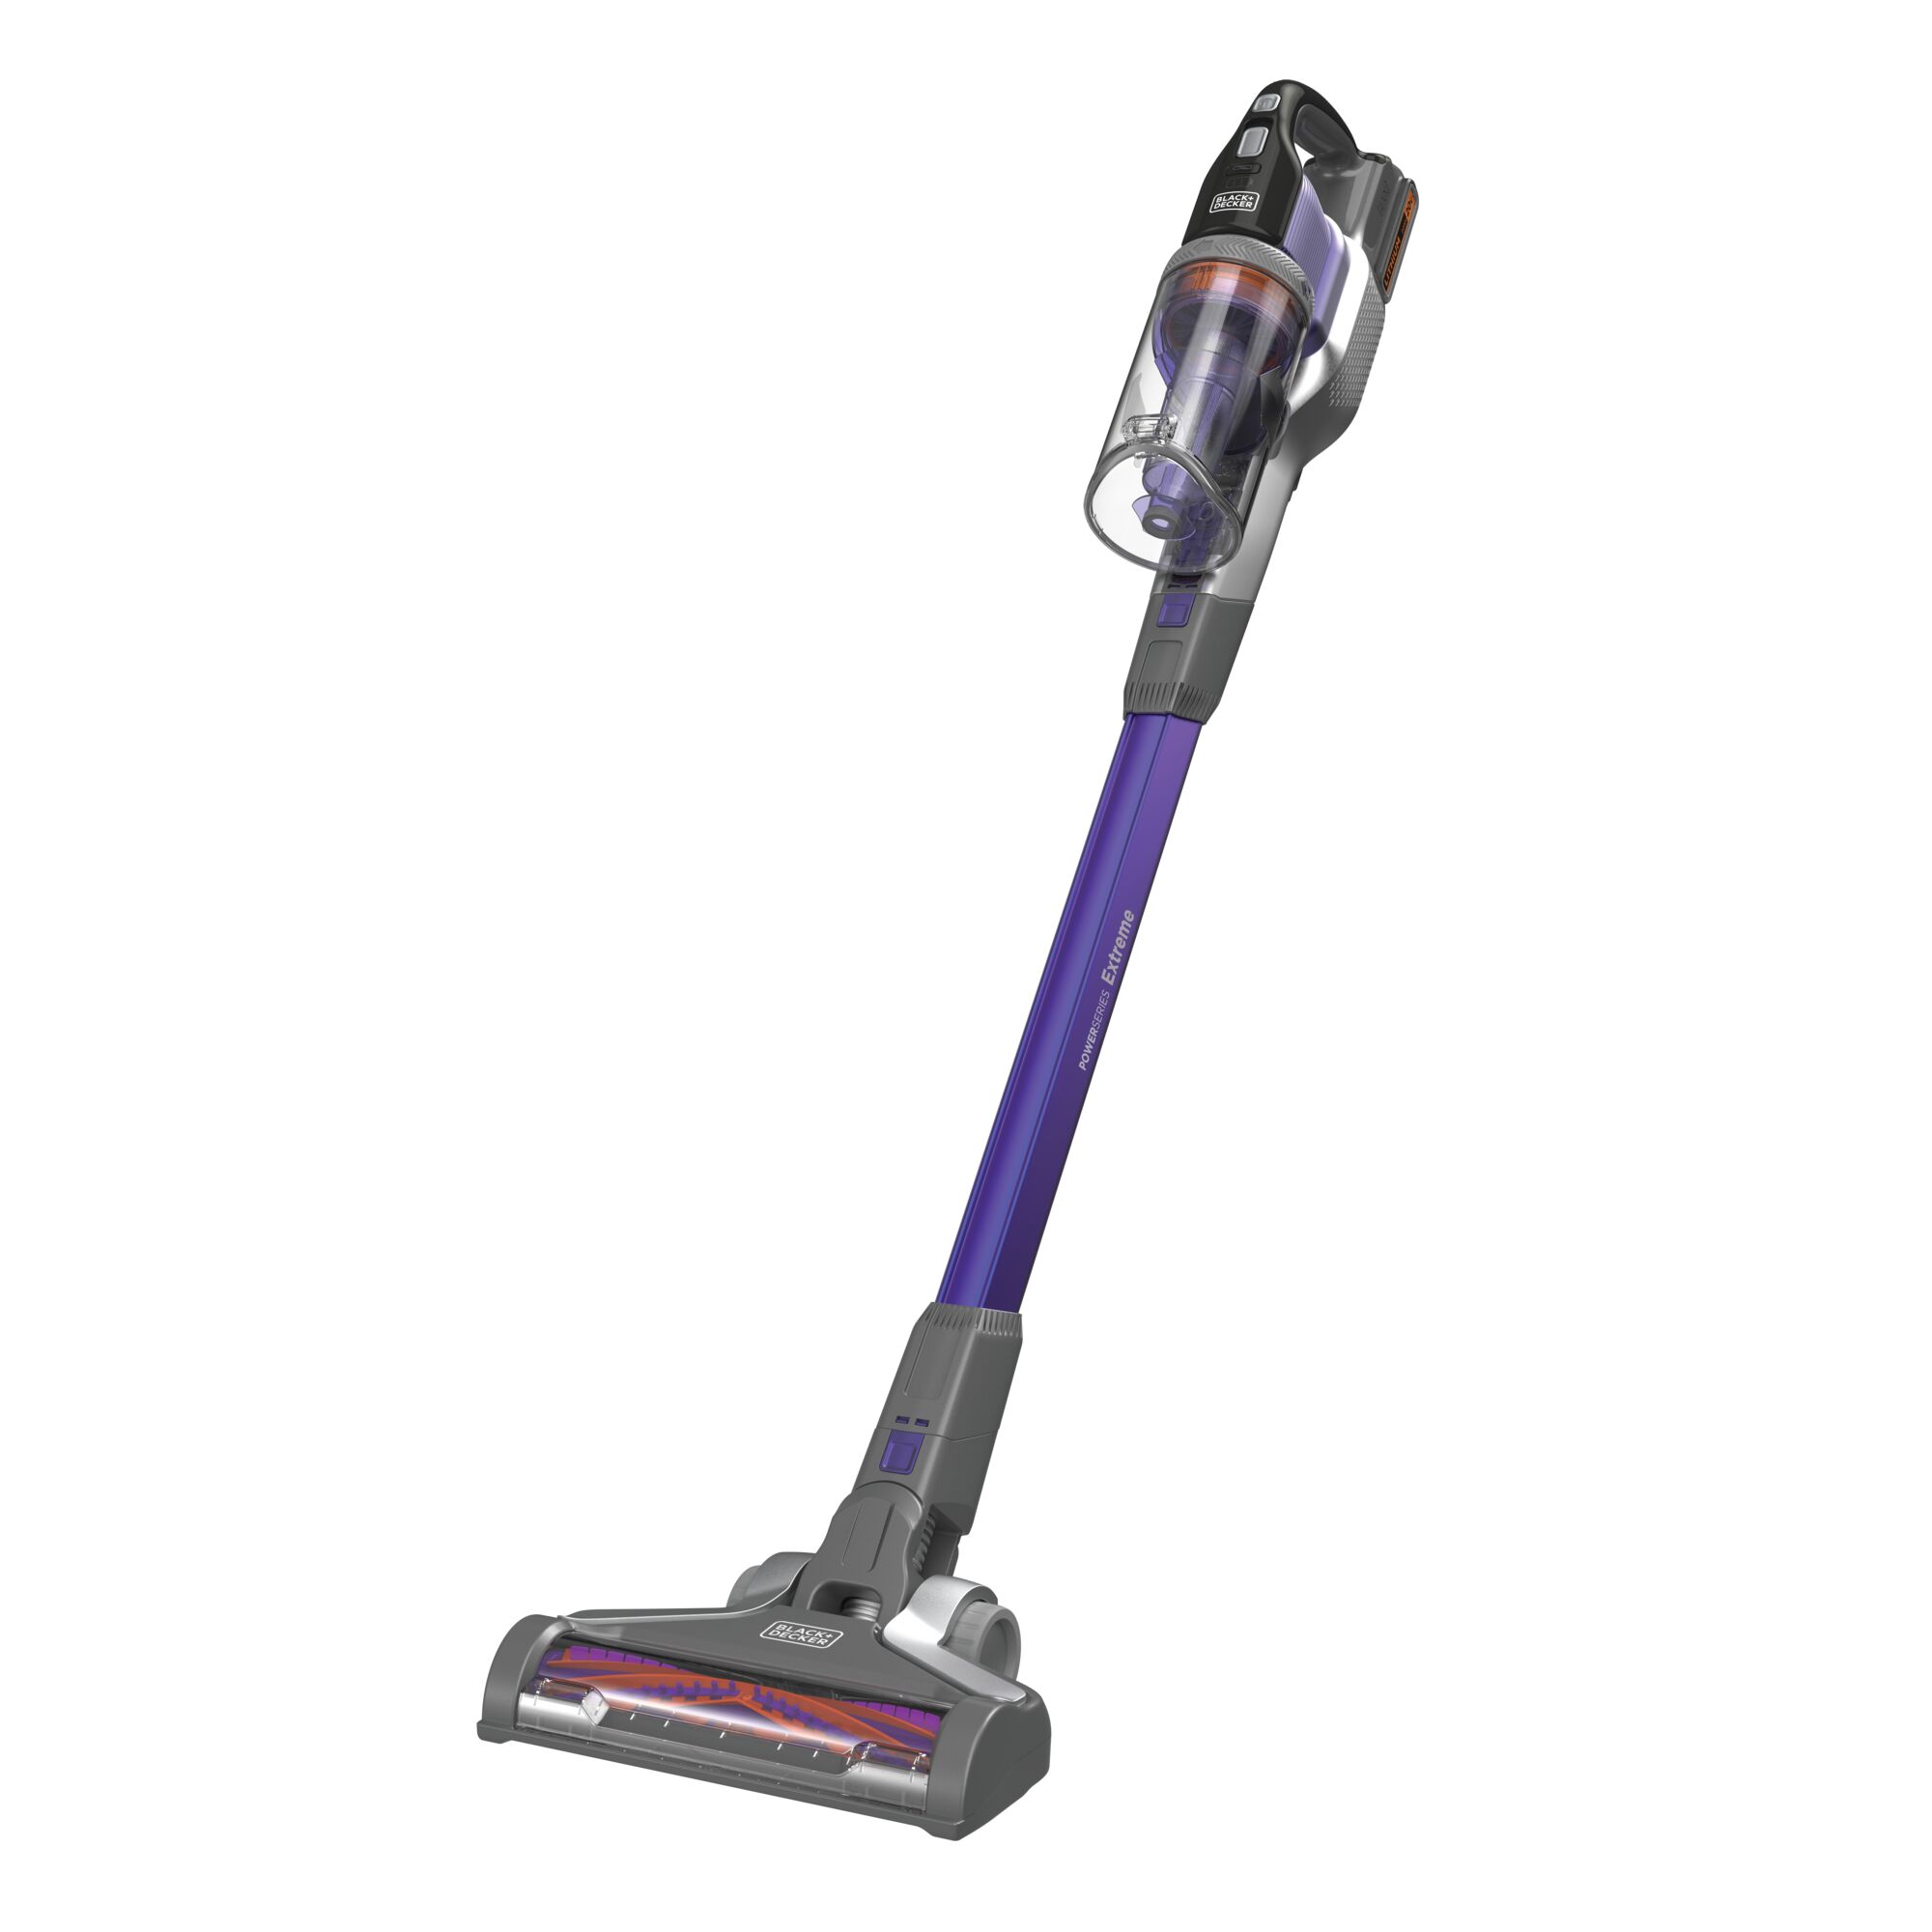 Profile of POWERSERIES Extreme pet cordless stick vacuum cleaner.